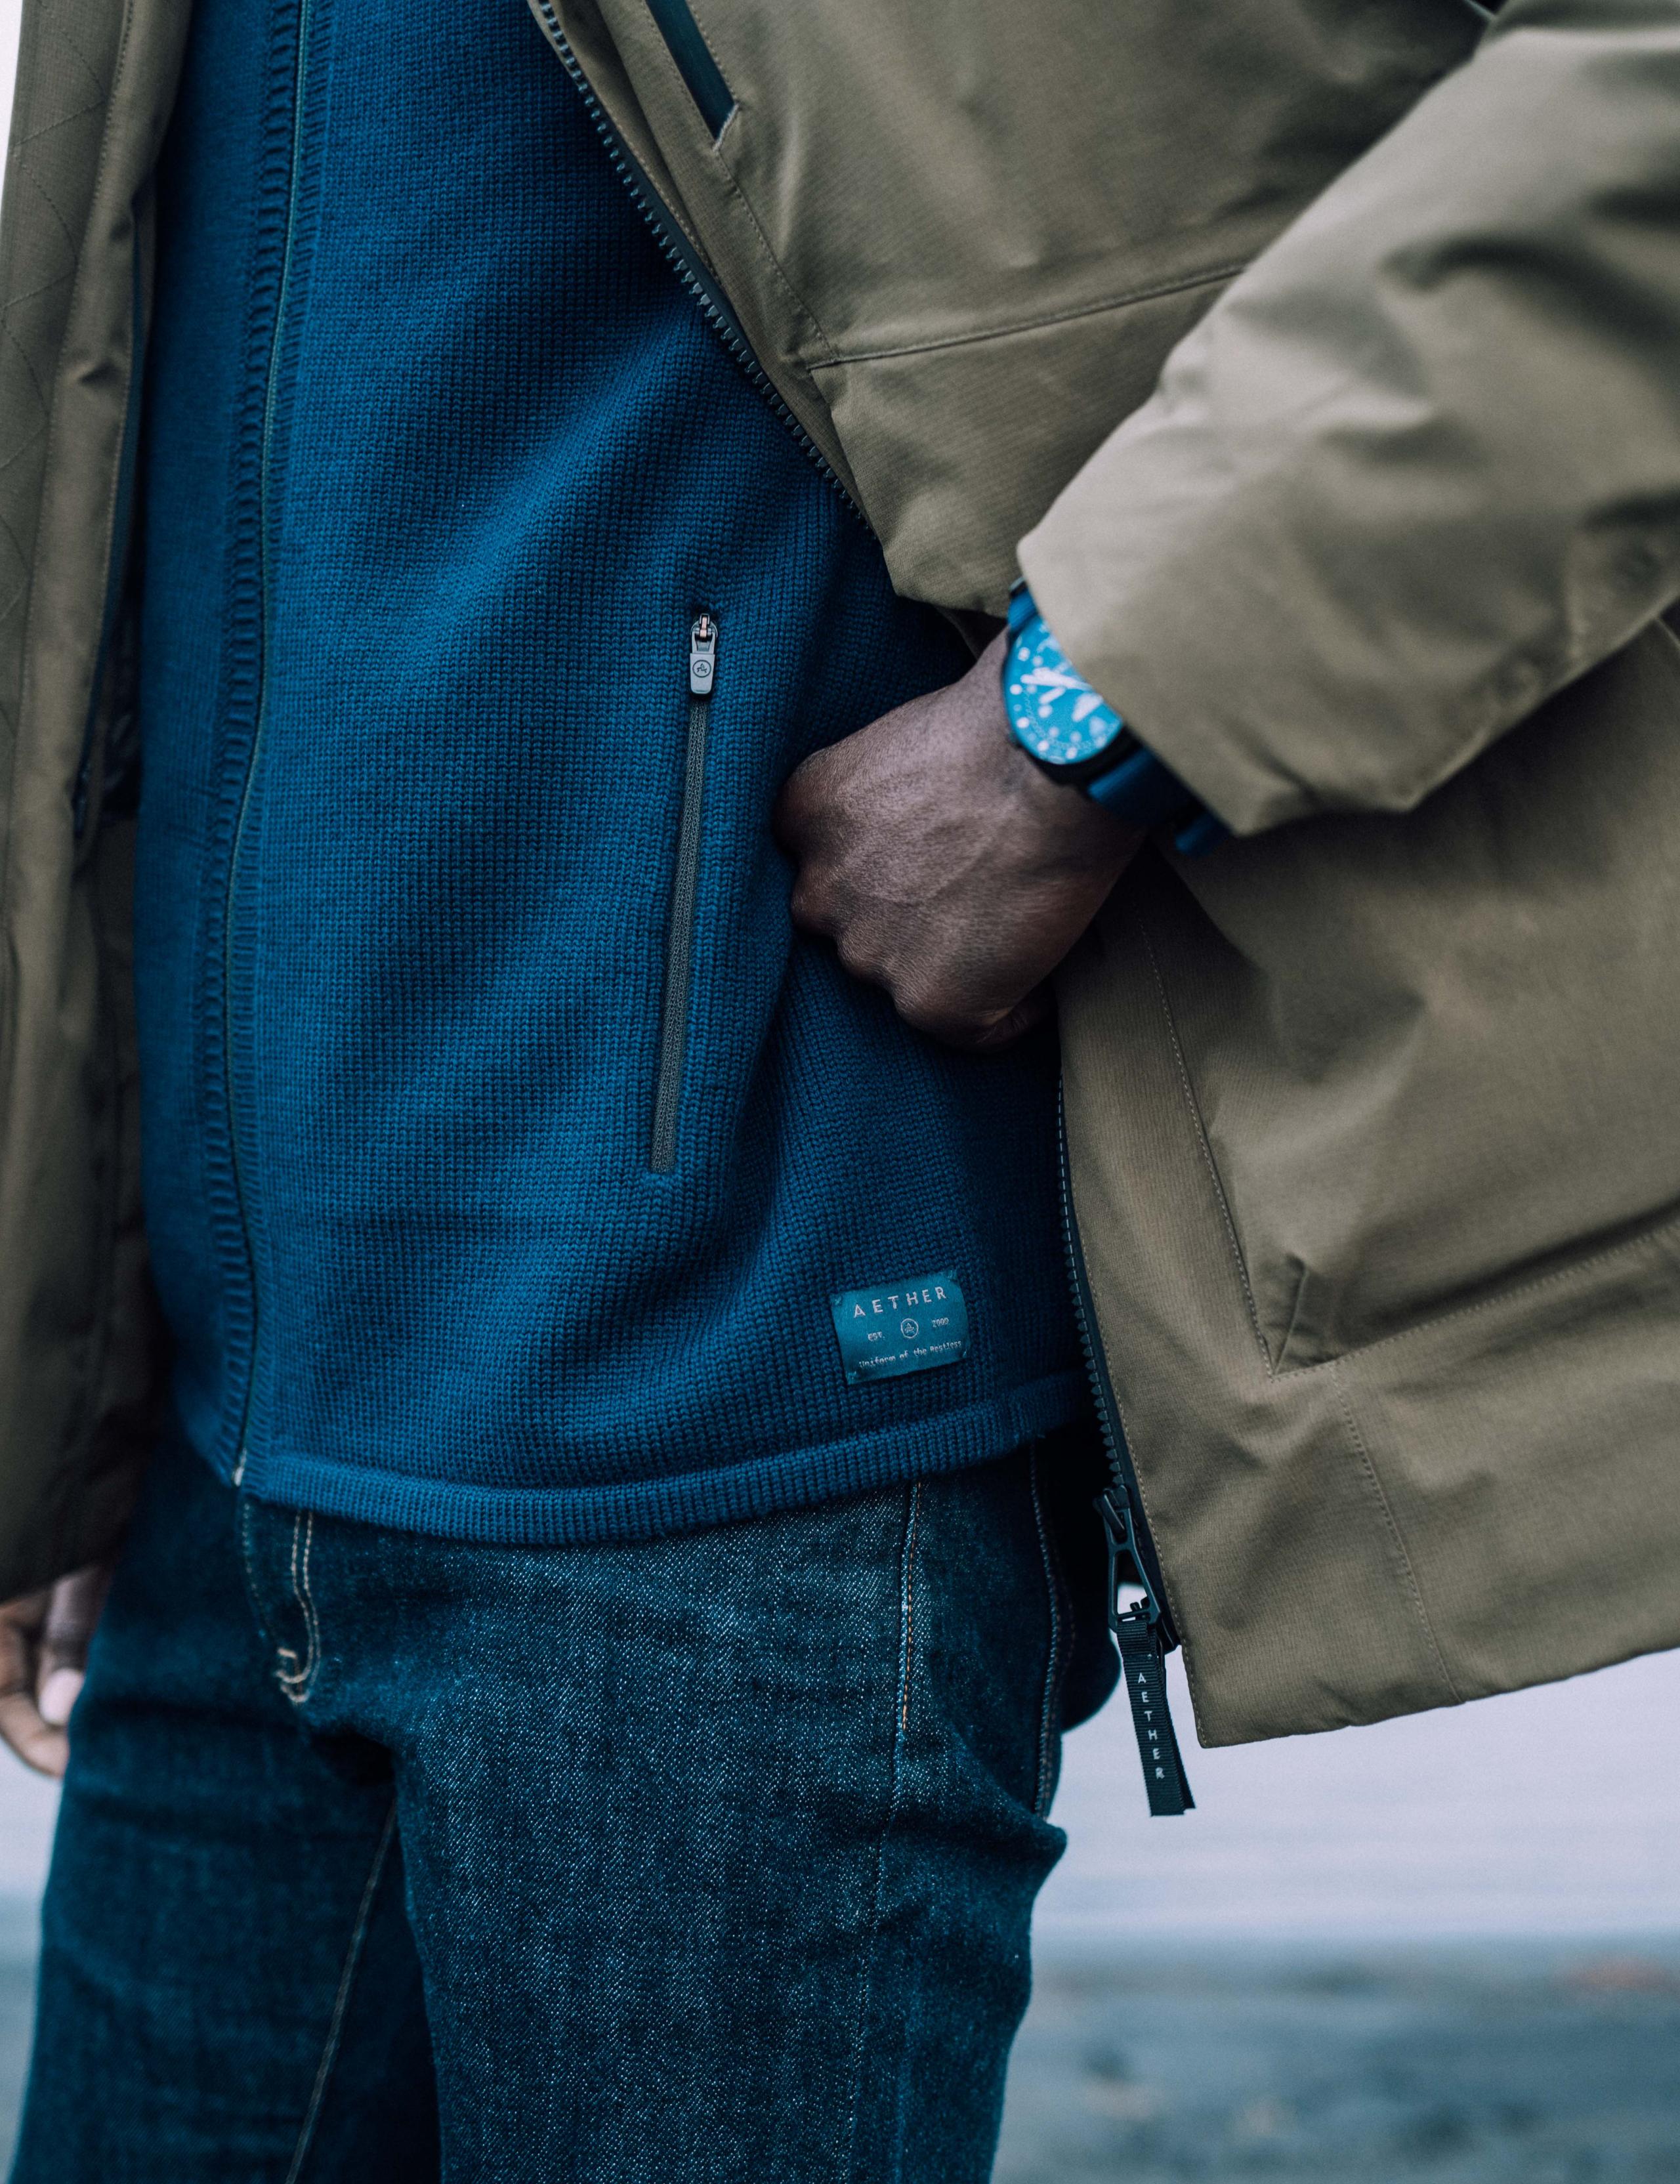 Detailed shot of the Riley Sweater pocket zipper.